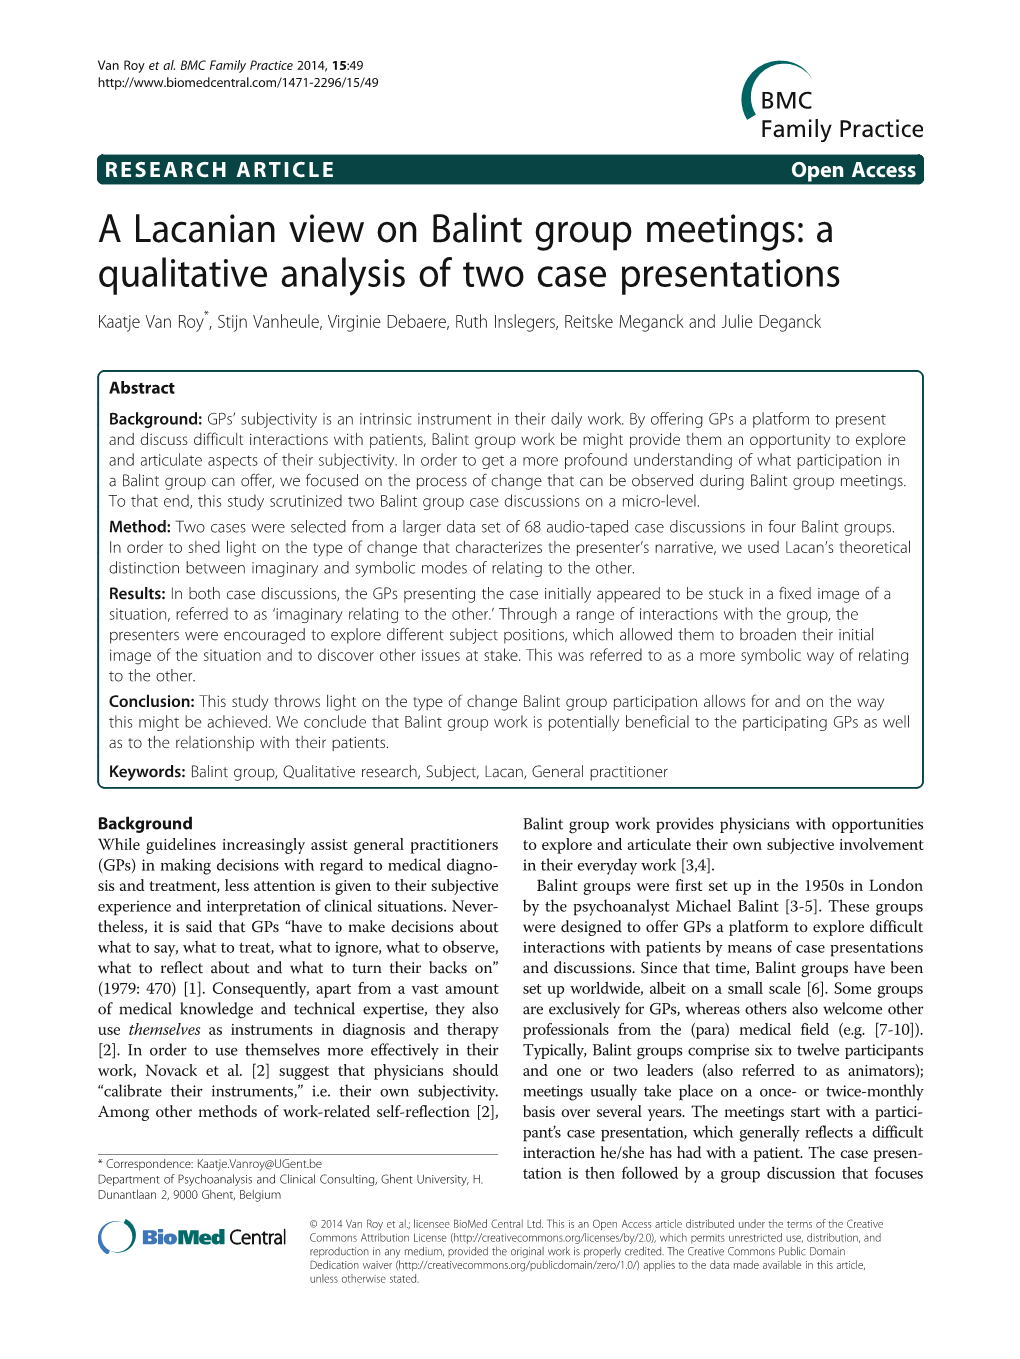 A Lacanian View on Balint Group Meetings